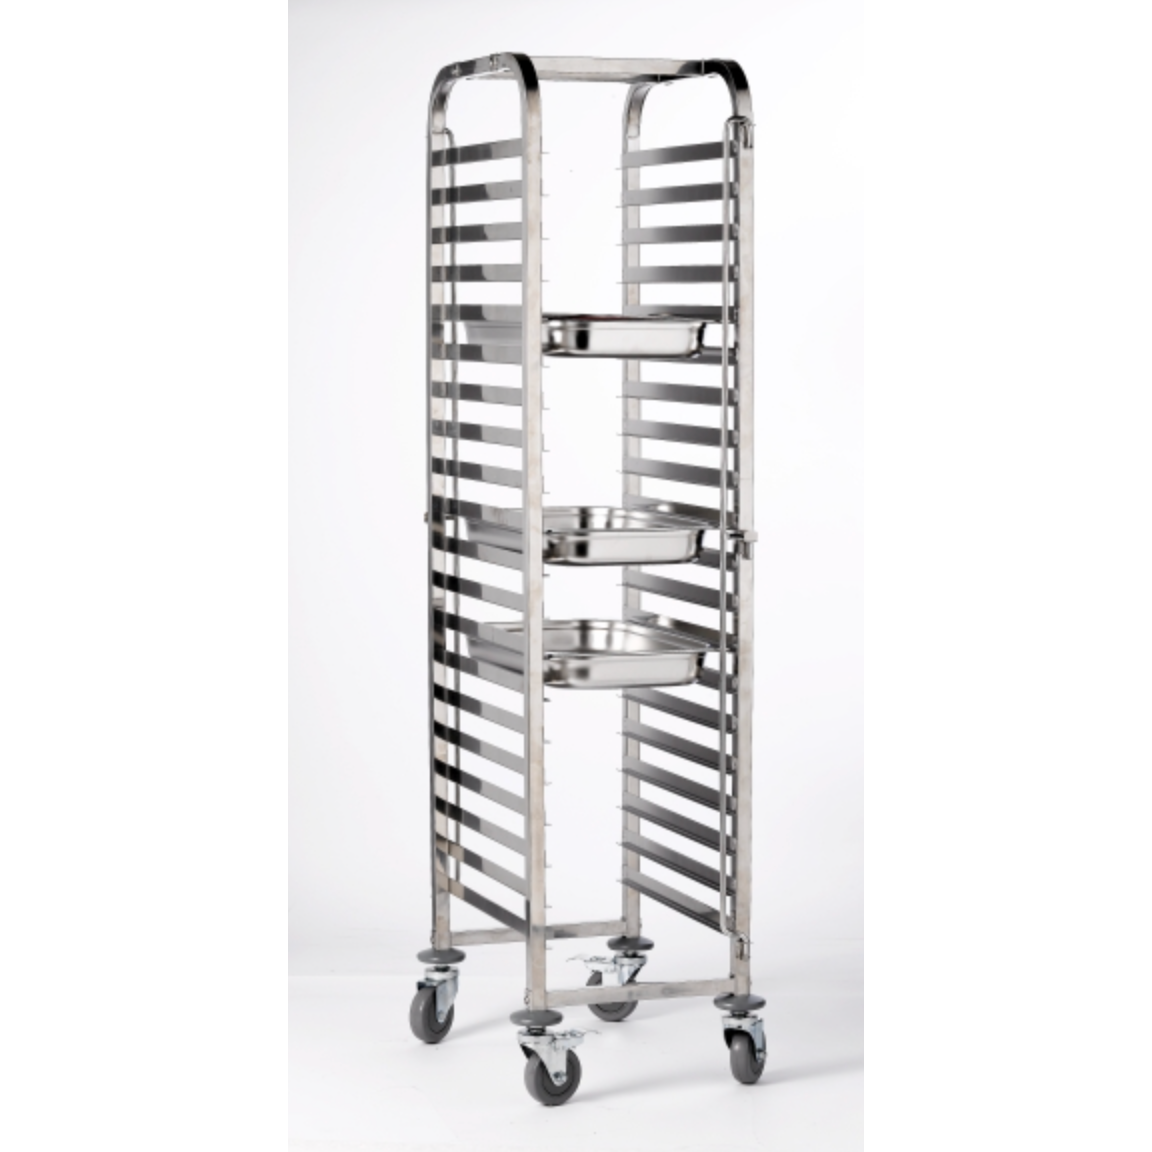 GenWare Gastronorm Trolley 1/1GN 20 Shelves